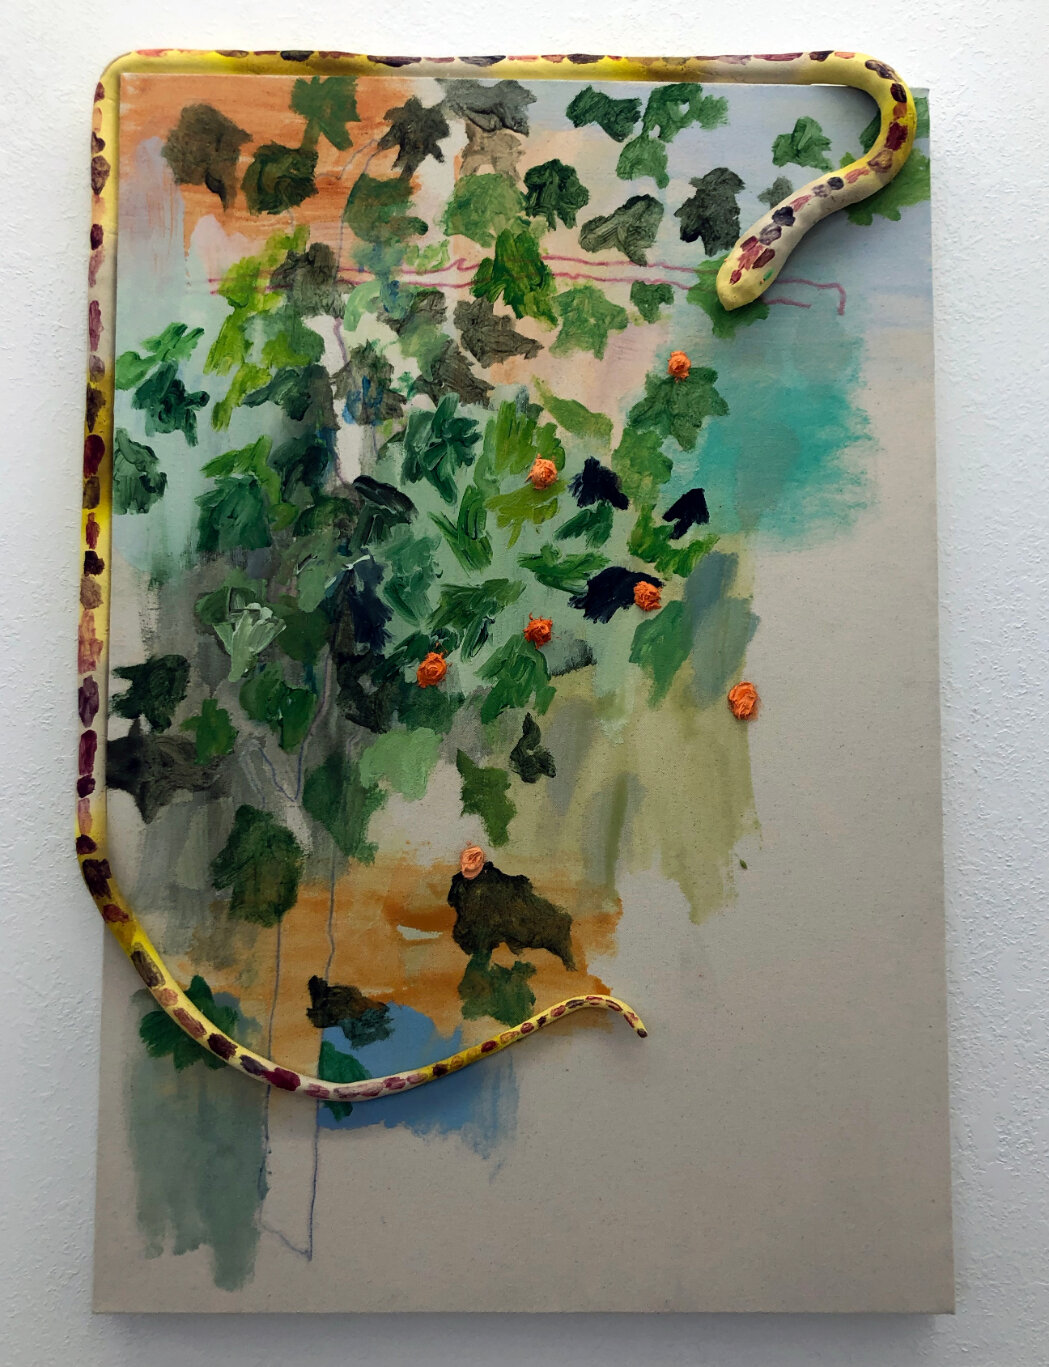  Ross Caliendo  Garden Snake , 2017 Oil, acrylic, and colored pencil on canvas with artist made clay snake frame  36.5 x 24.5 inches (92.71 x 62.23 cm) 